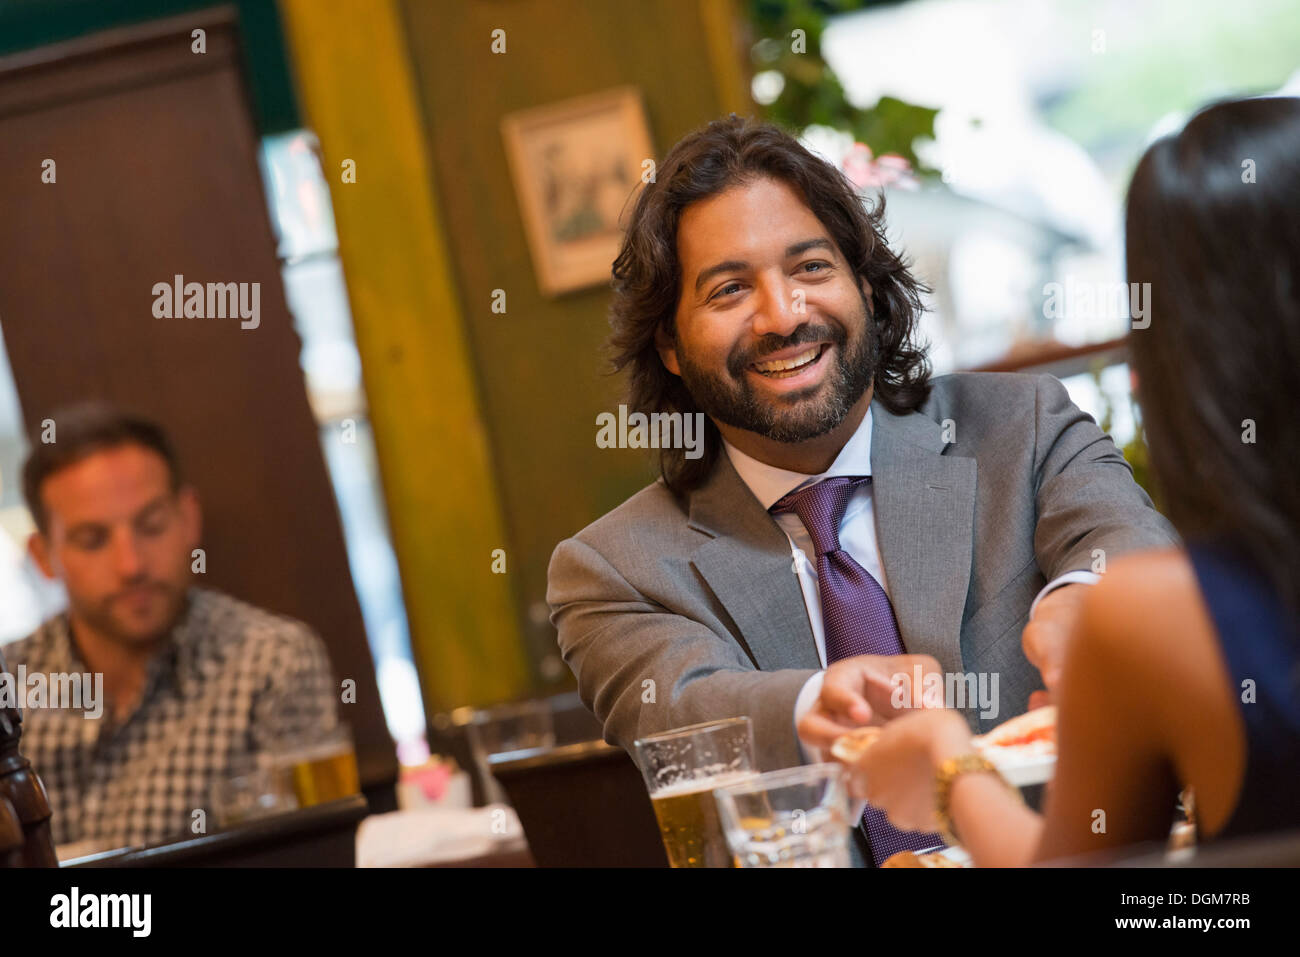 Business people. Two people seated at a table holding hands. A man in the background. Stock Photo